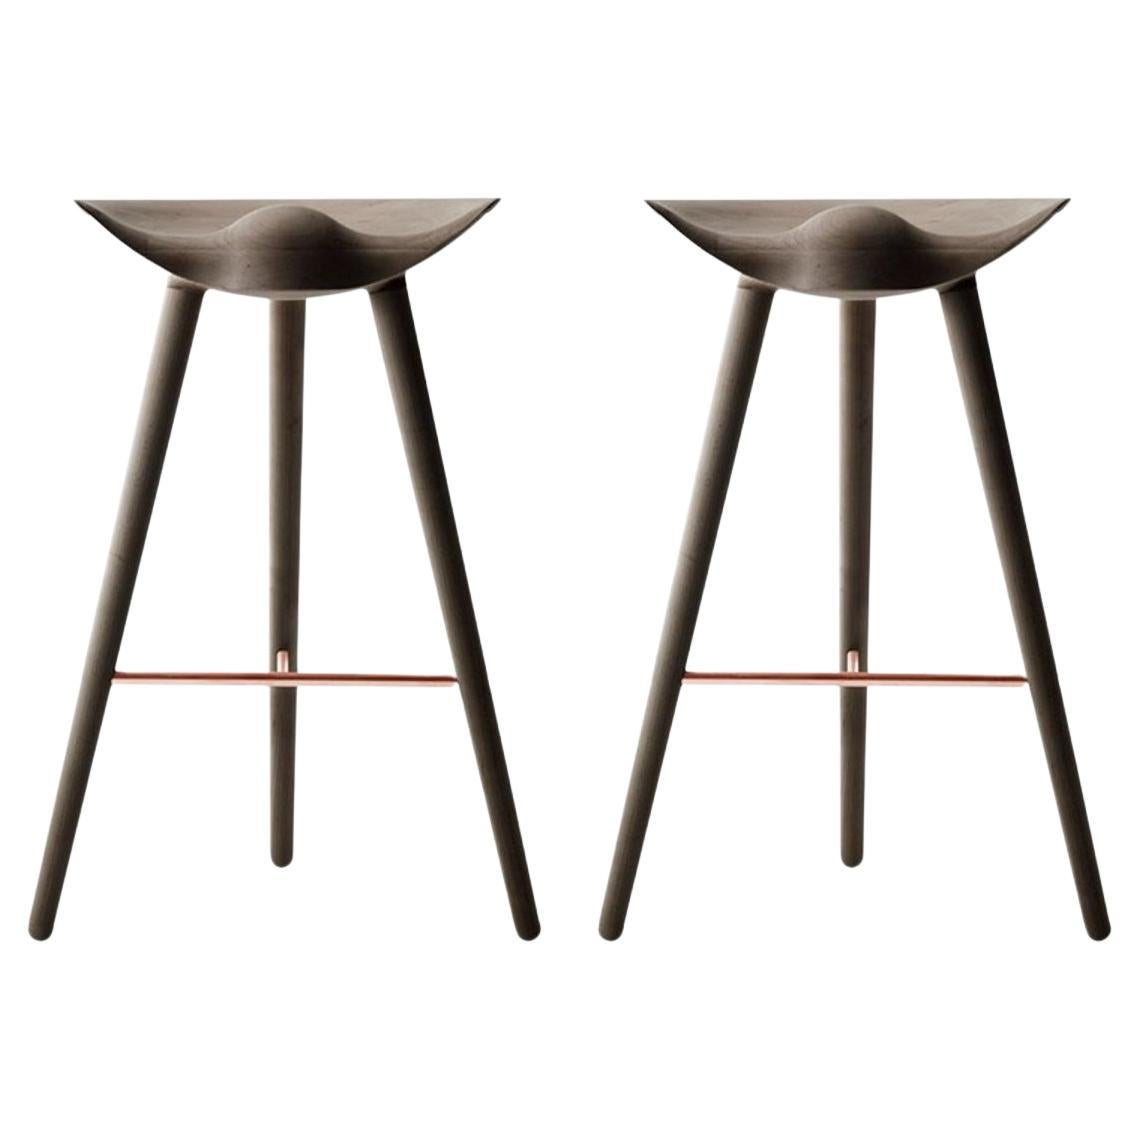 Set of 2 Brown Oak and Copper Bar Stools by Lassen